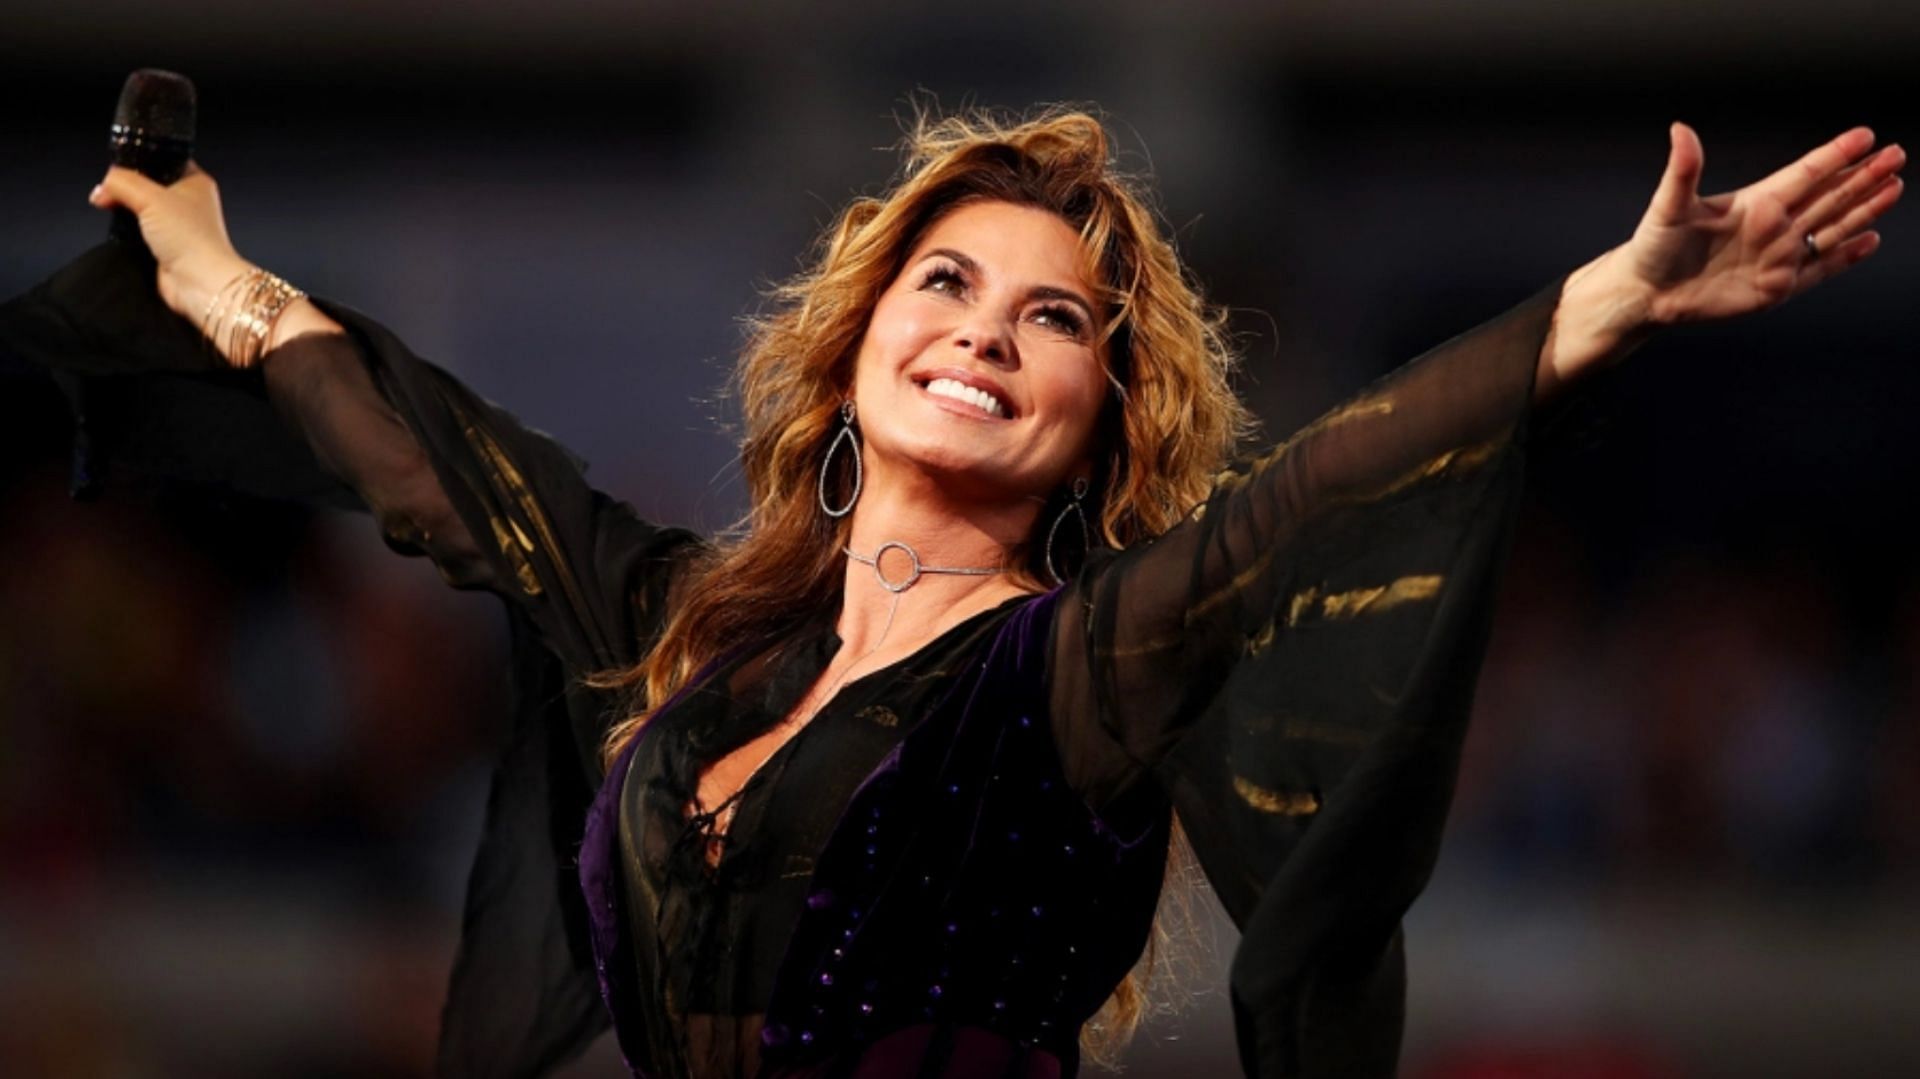 Shania Twain Queen of Me Tour 2023 Tickets, presale, where to buy